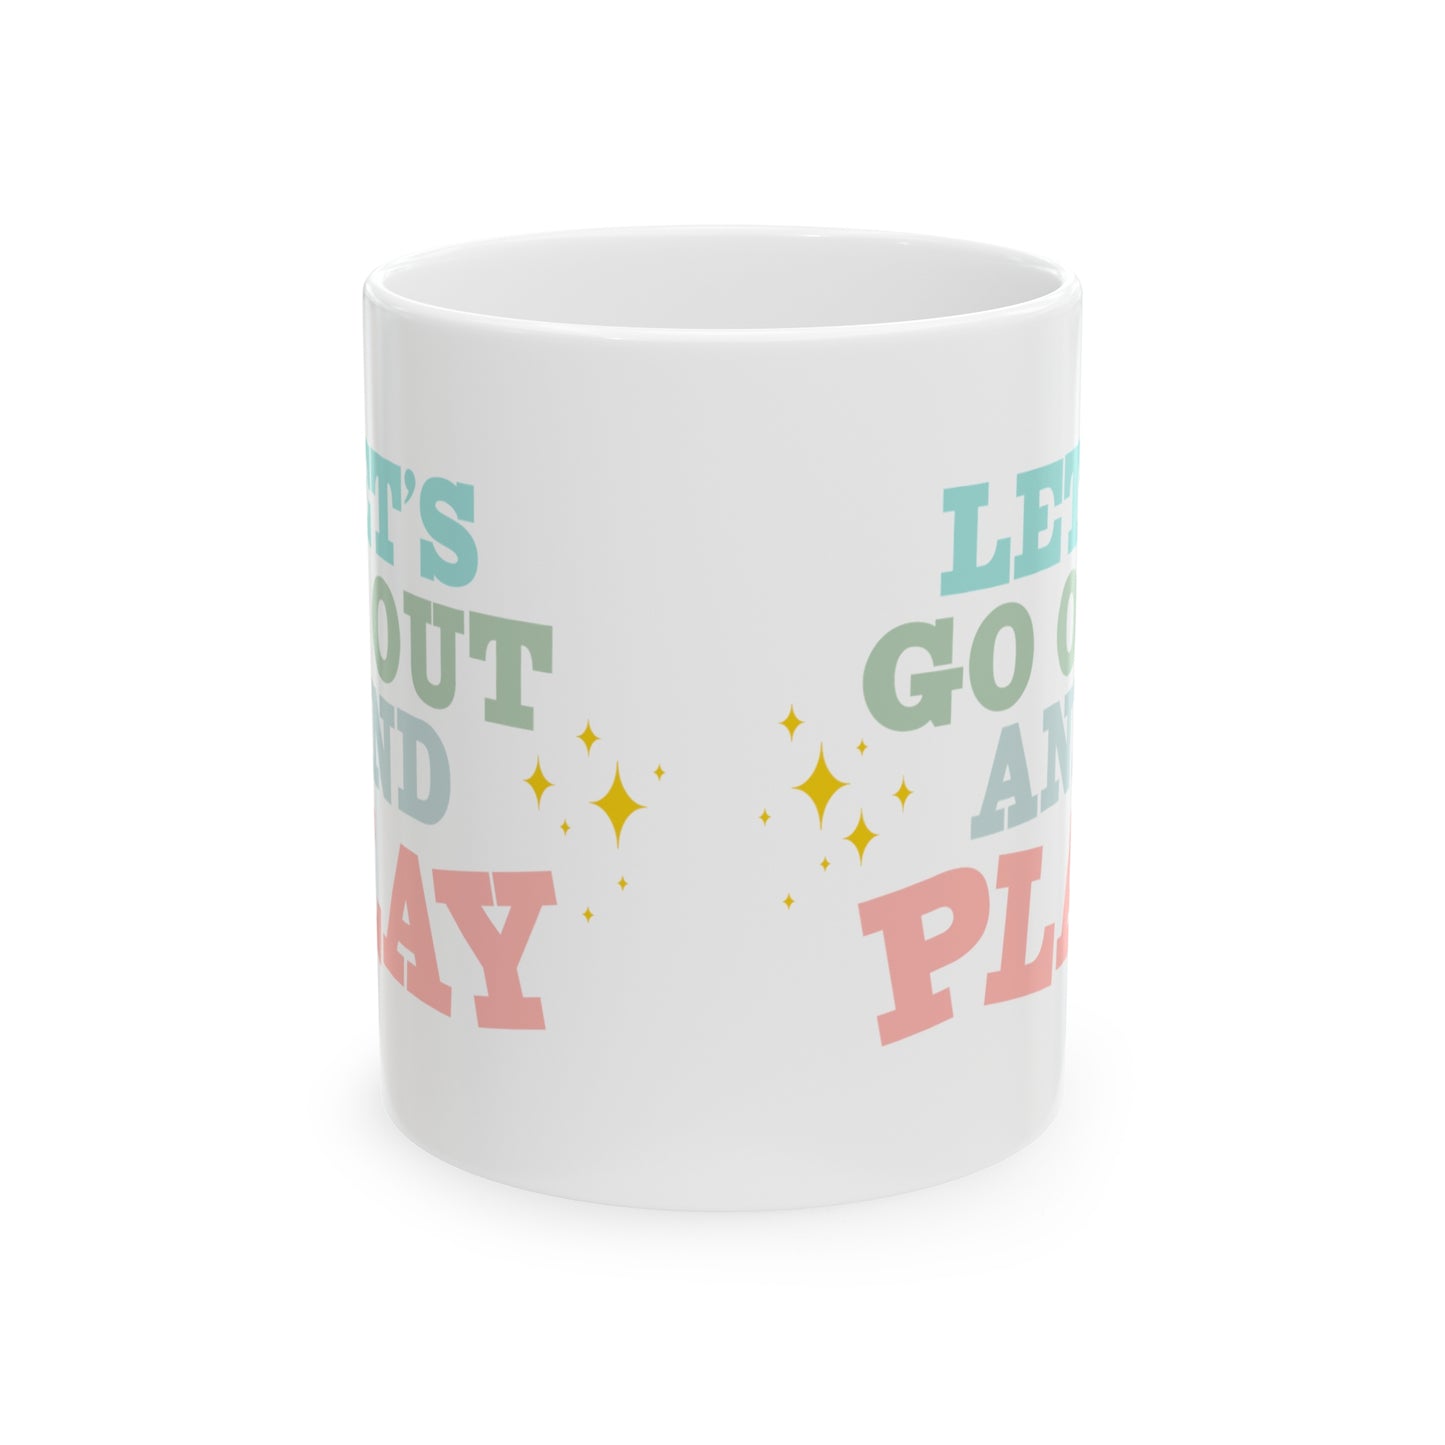 Let's Go Out And Play Mugs, Occupational Therapy Mugs, OT Mugs, Therapist Mugs